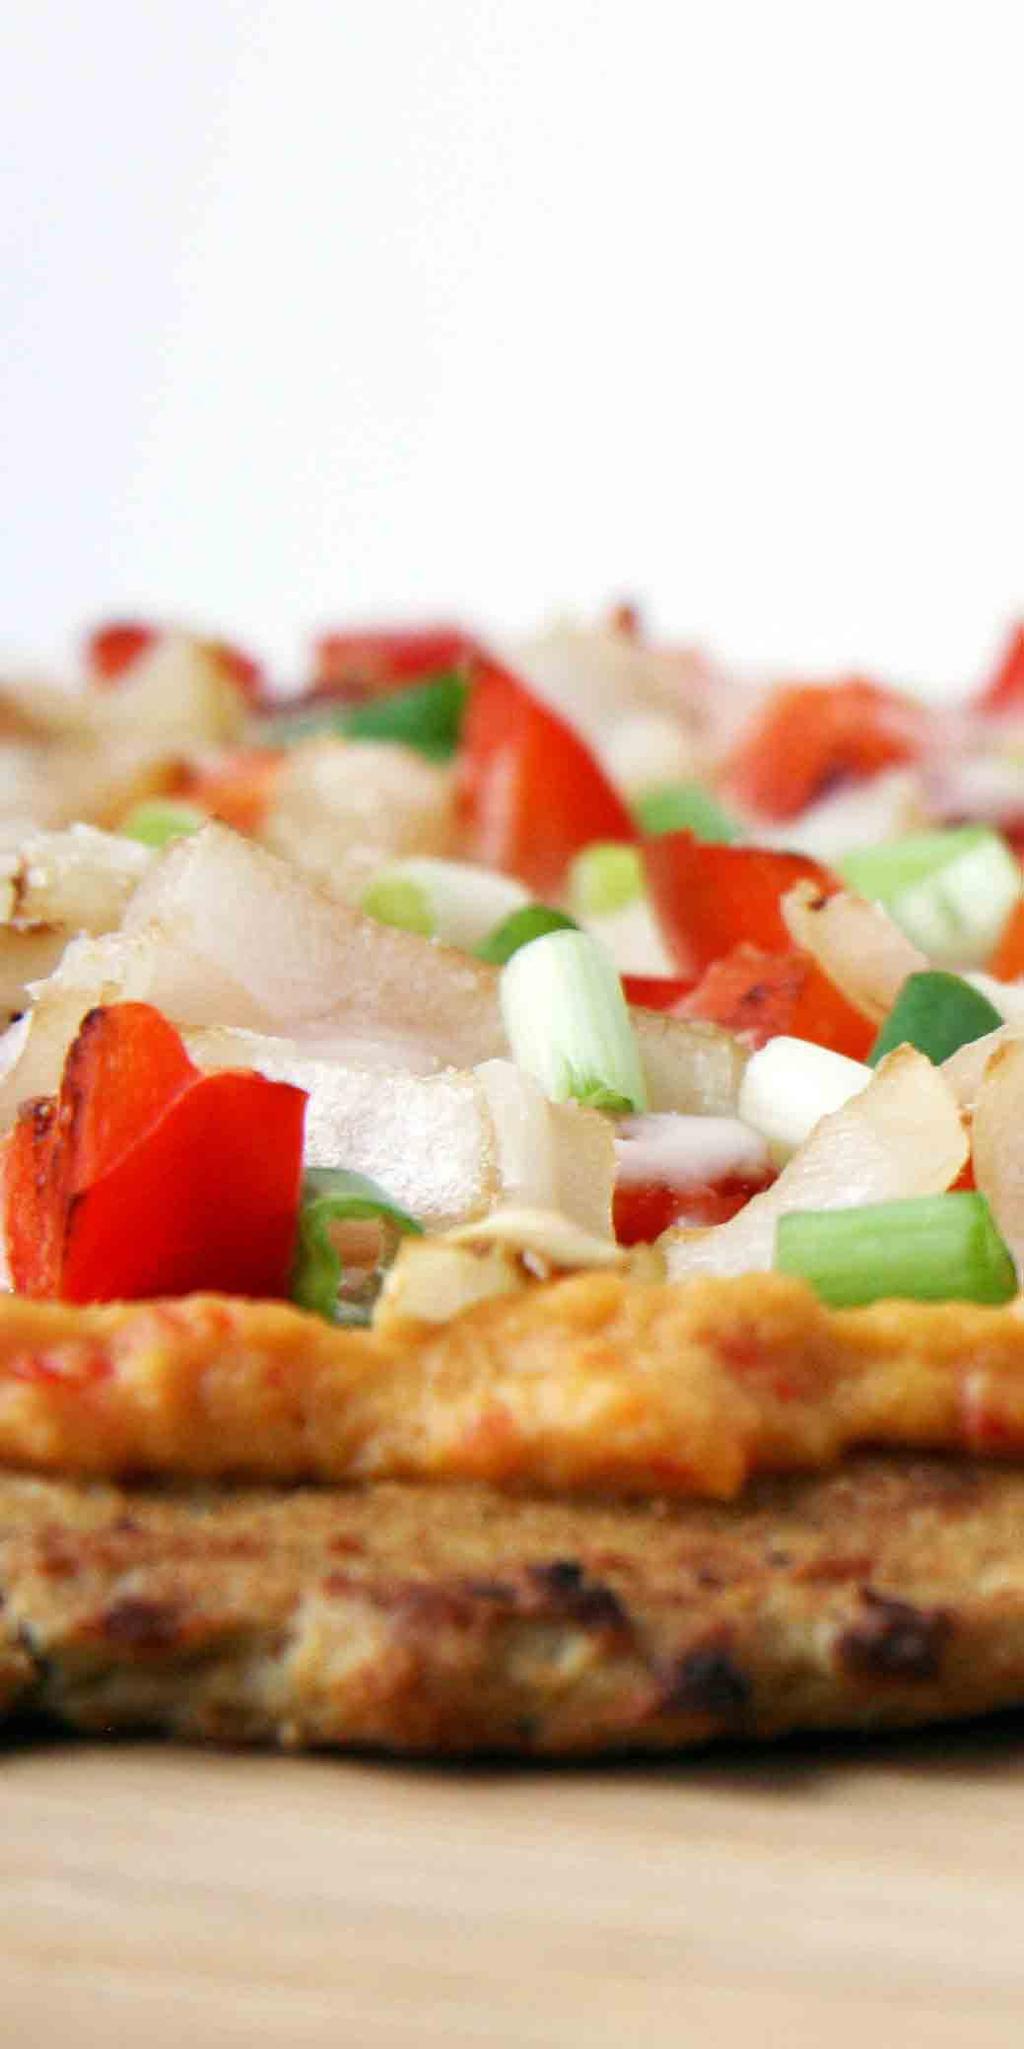 VEGGIE PIZZA 1 teaspoon olive oil ½ tin tomatoes ¼ onion, diced finely 1 tablespoon dried mixed herbs Pinch of salt 1 wholemeal Lebanese pita bread (1 large or 2 small) 3 cups of your favourite